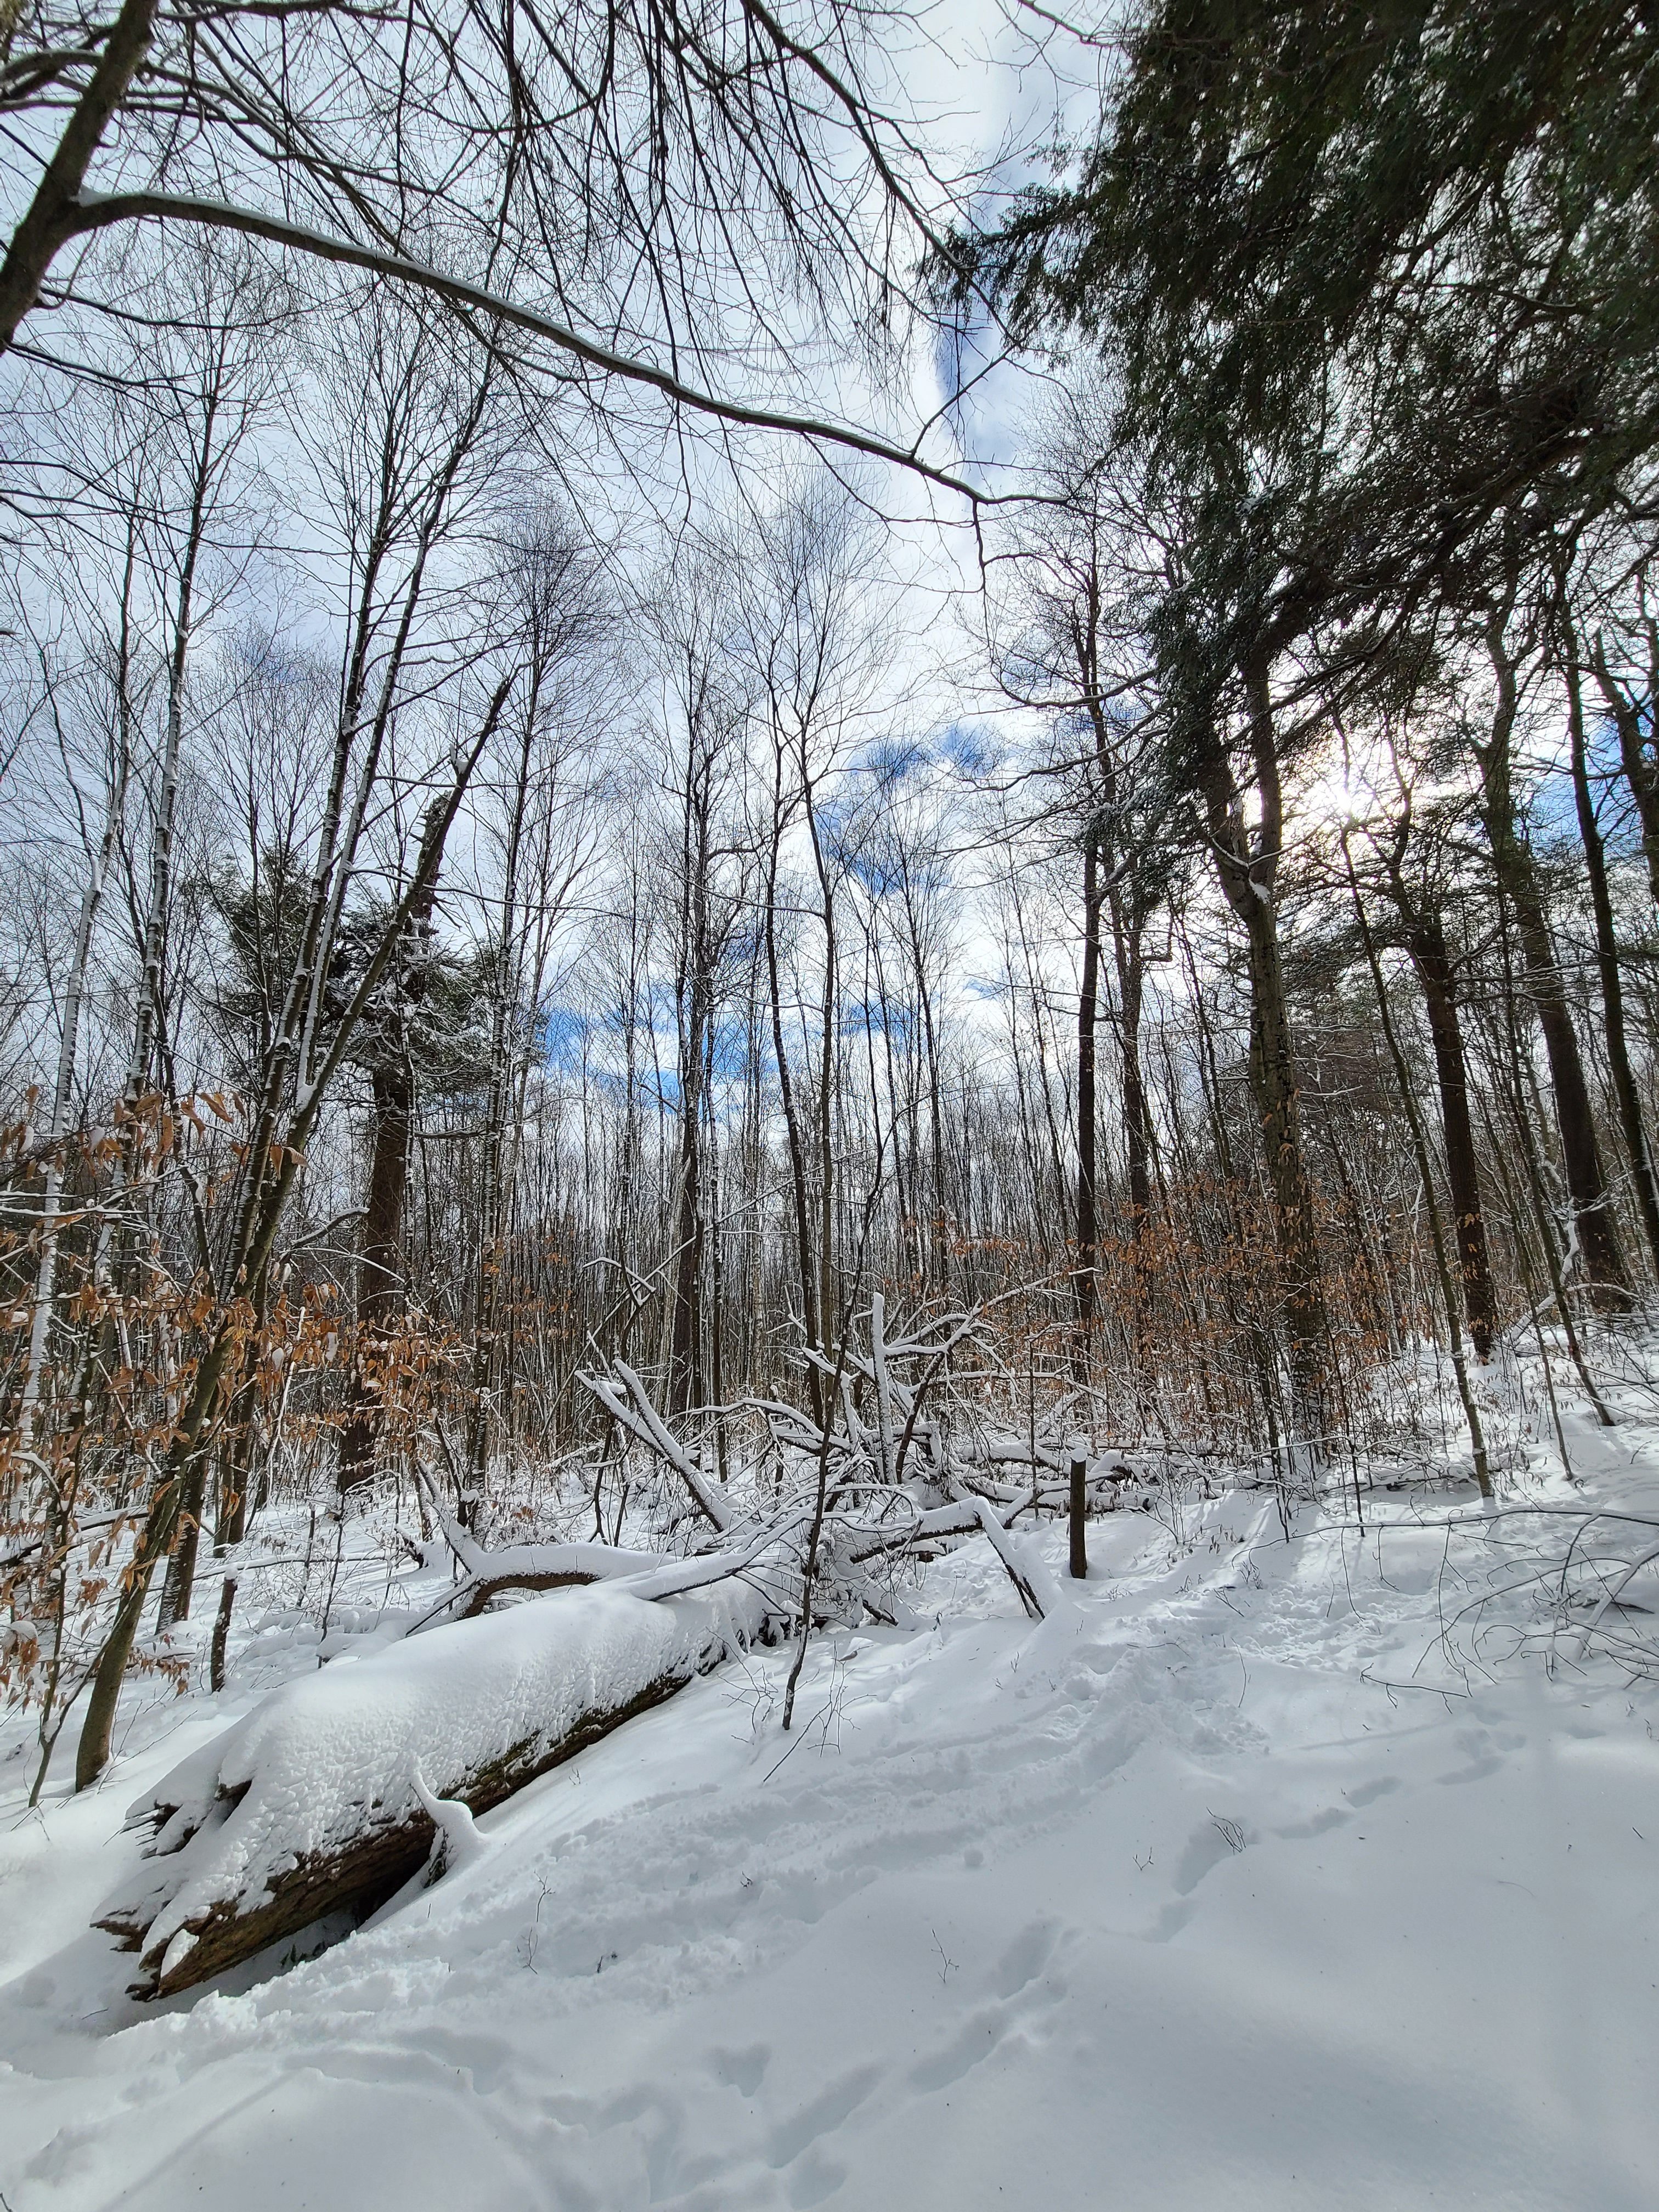 winter in the forest; snow on ground with trees and blue sky